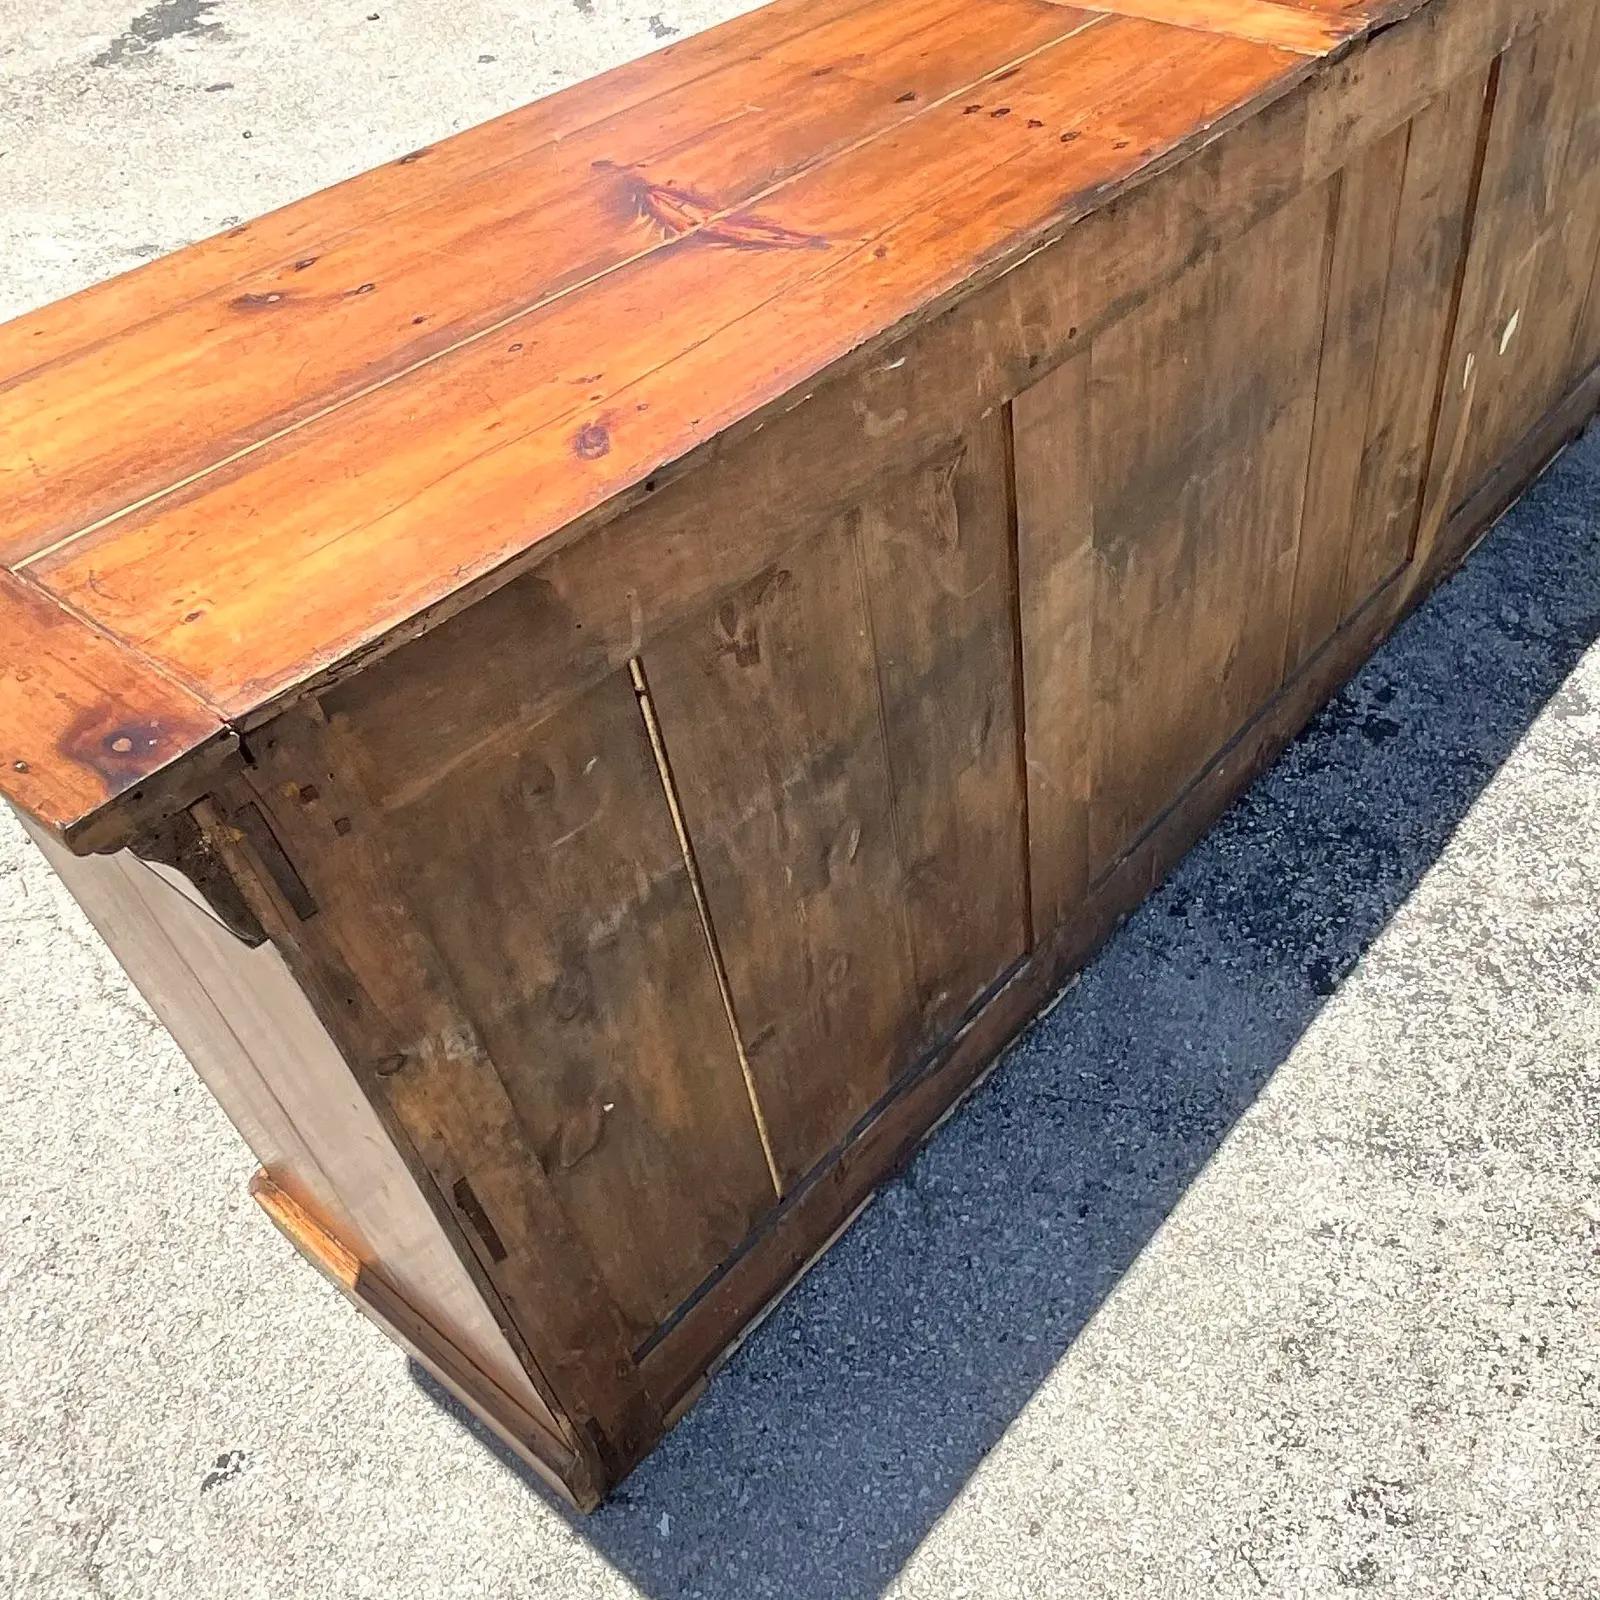 Fantastic authentic French credenza. Beautiful weathers pine with the gorgeous patina of time. Beautiful wood grain detail. Lots of great storage below. Acquired from a Boca estate.